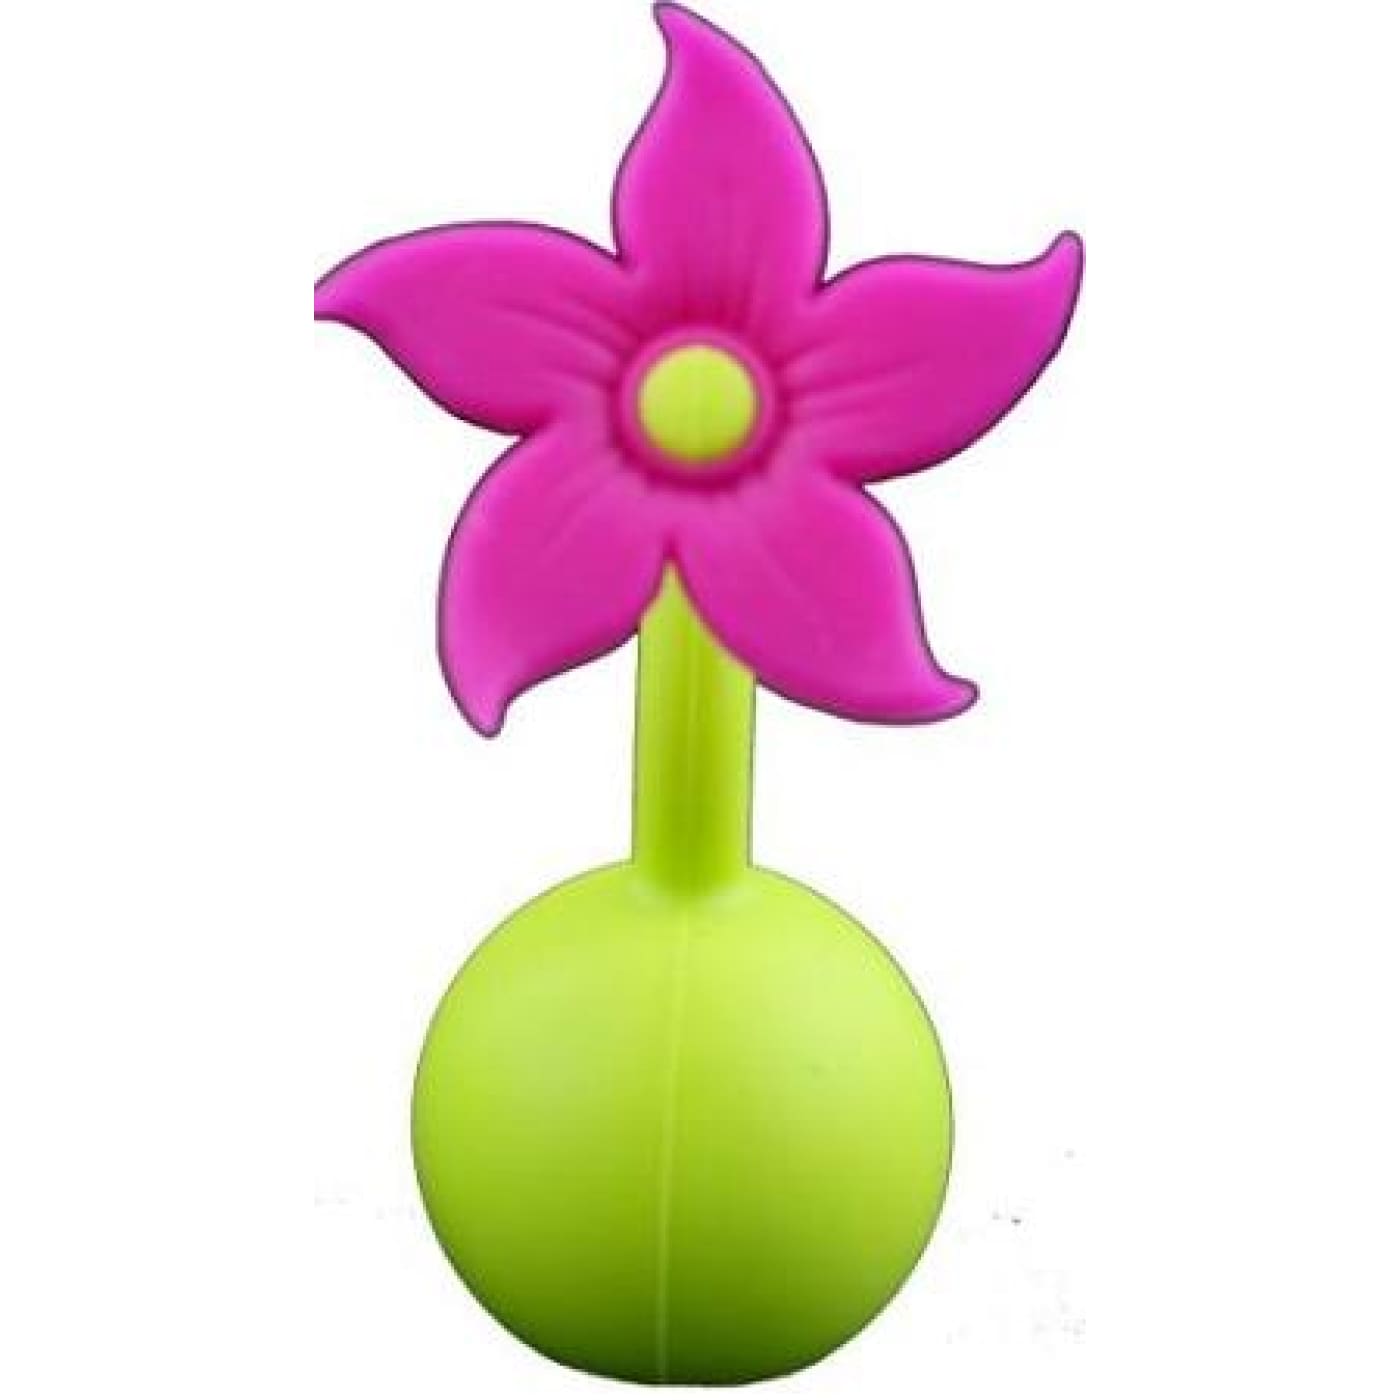 Haakaa Silicone Breast Pump Flower Stopper - Limited Edition Pink - NURSING & FEEDING - BREAST PUMPS/ACCESSORIES